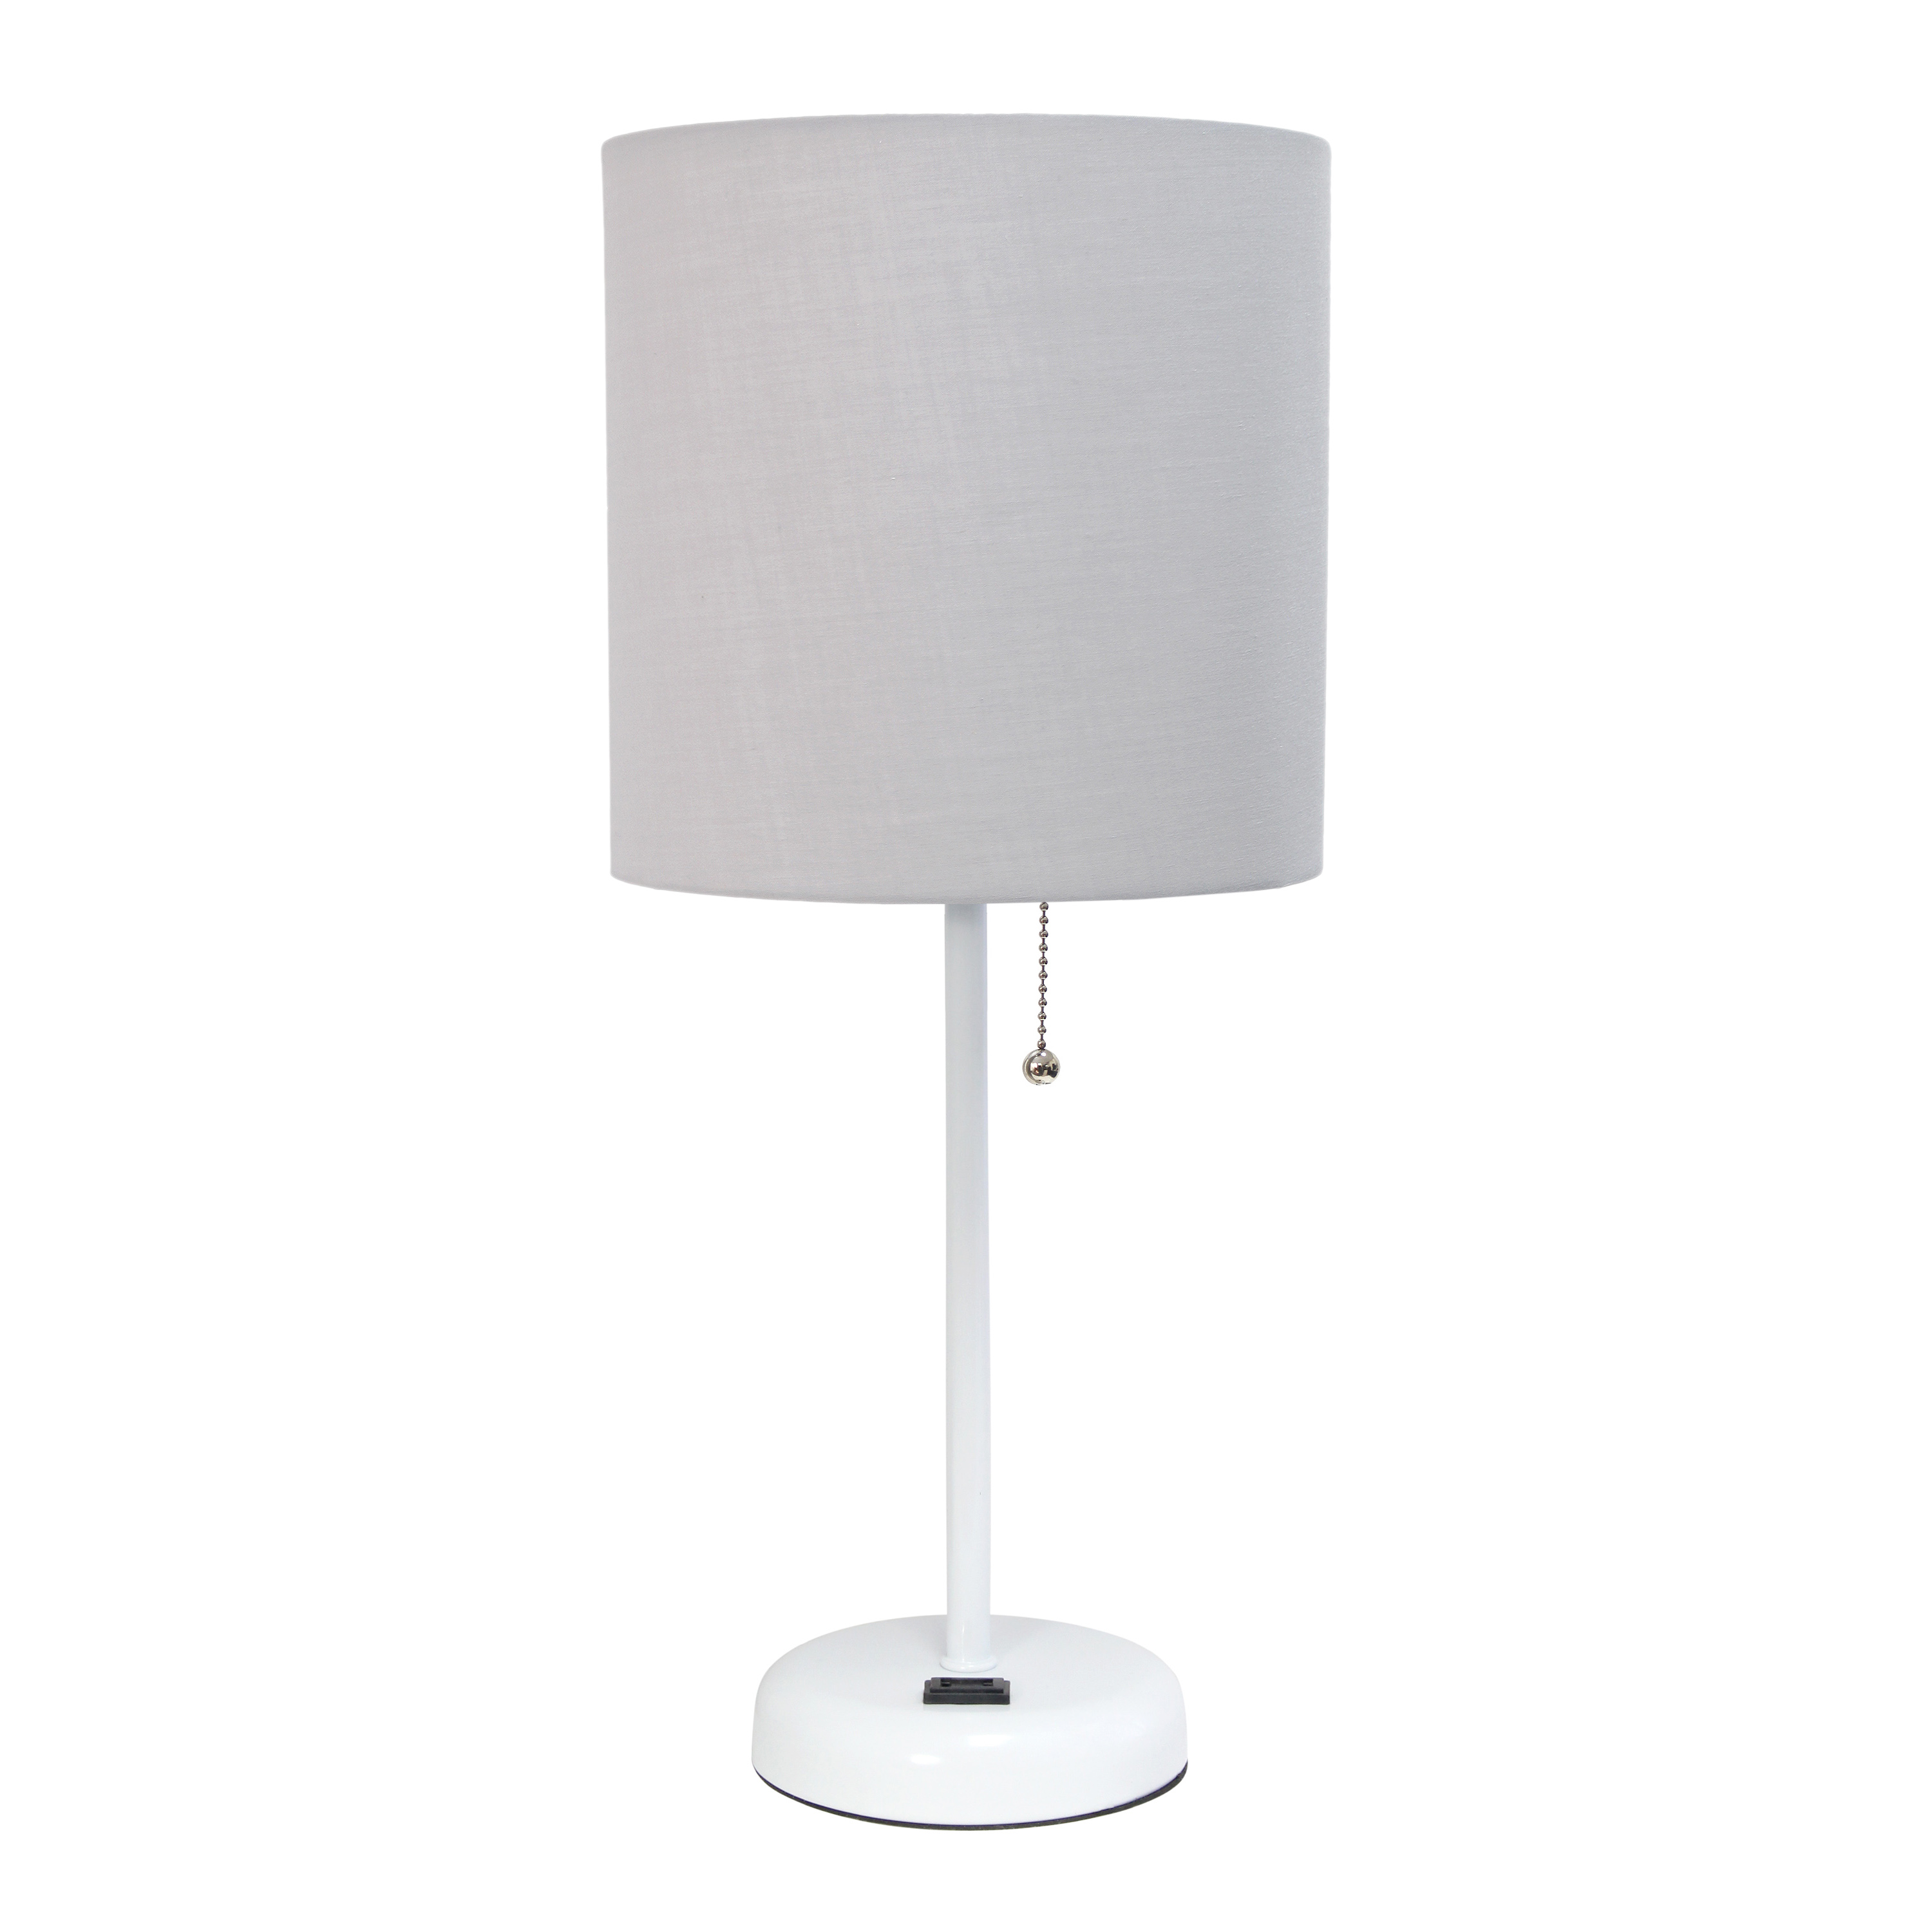 LimeLights White Stick Lamp with Charging Outlet and Fabric Shade, Gray